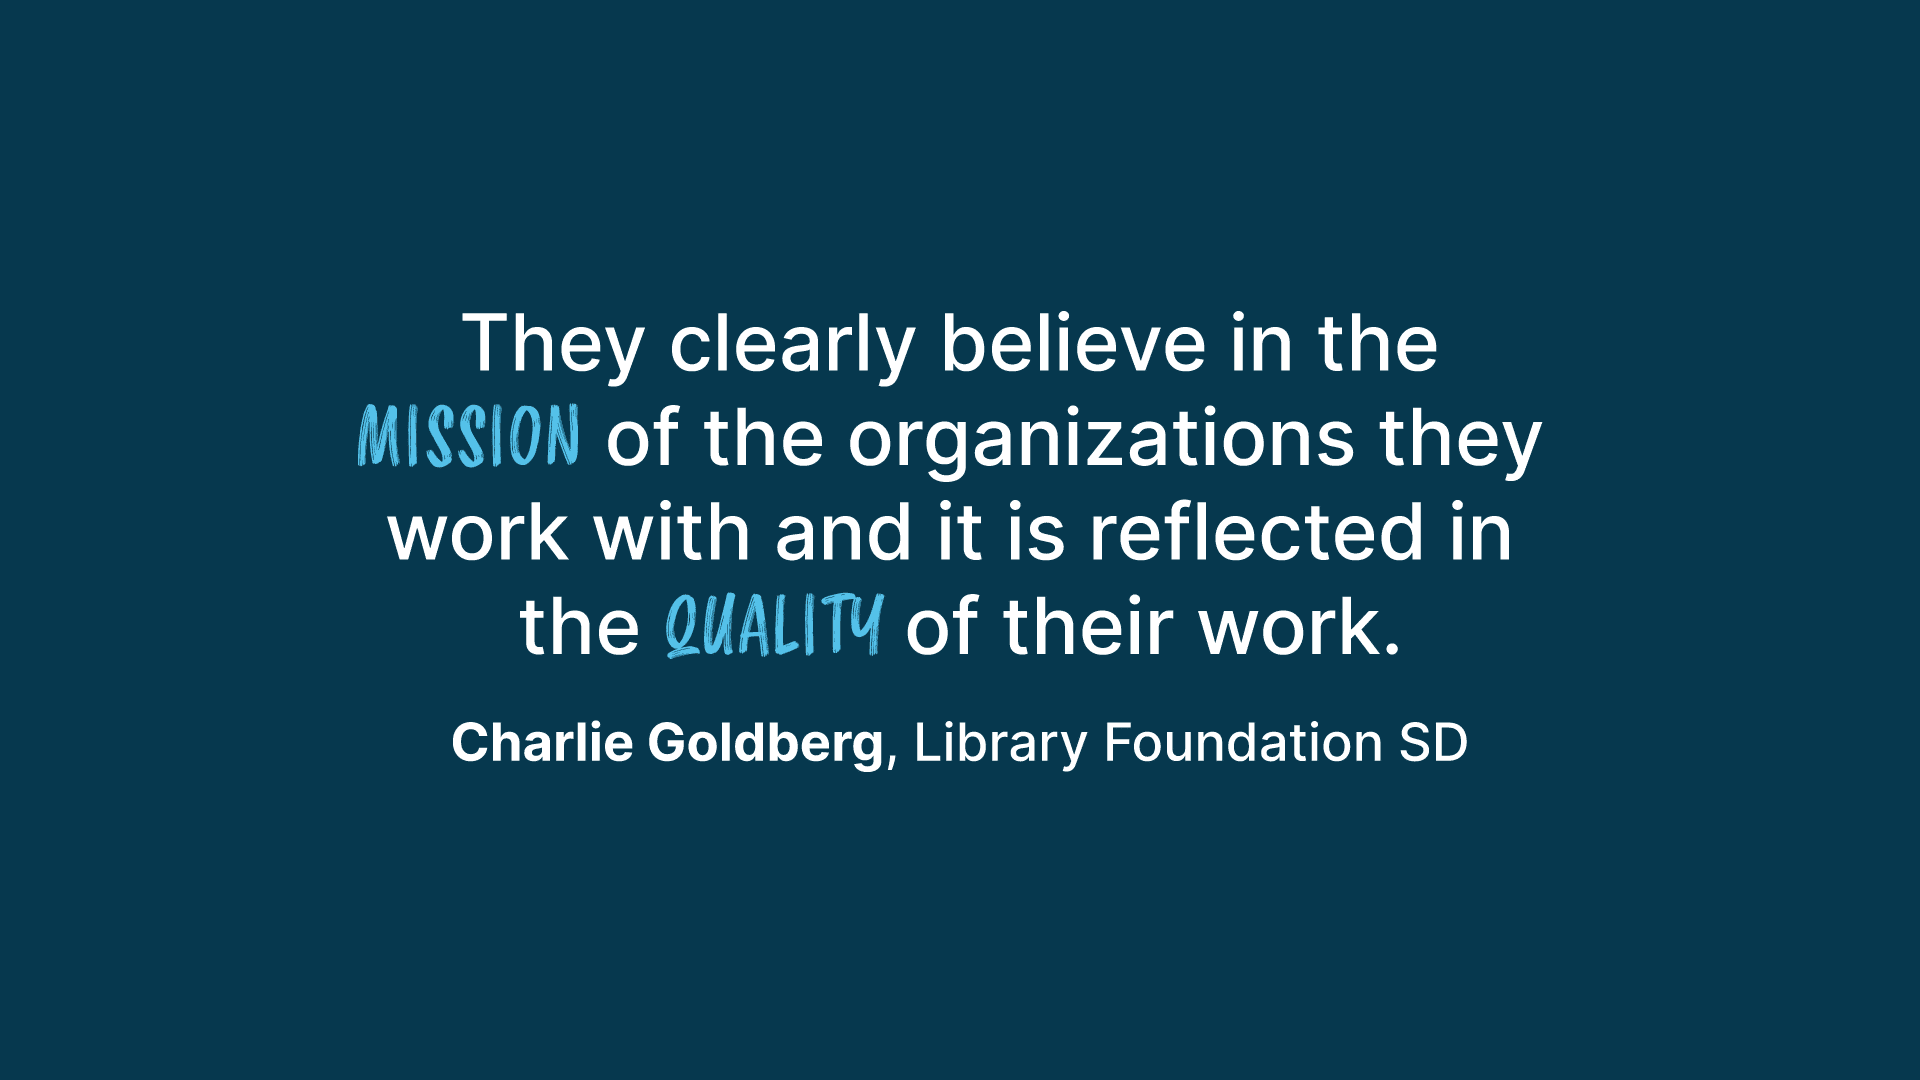 Quote from Charlie Goldberg, Library Foundation SD: "They clearly believe in the mission of the organizations they work with and it is reflected in the quality of their work."